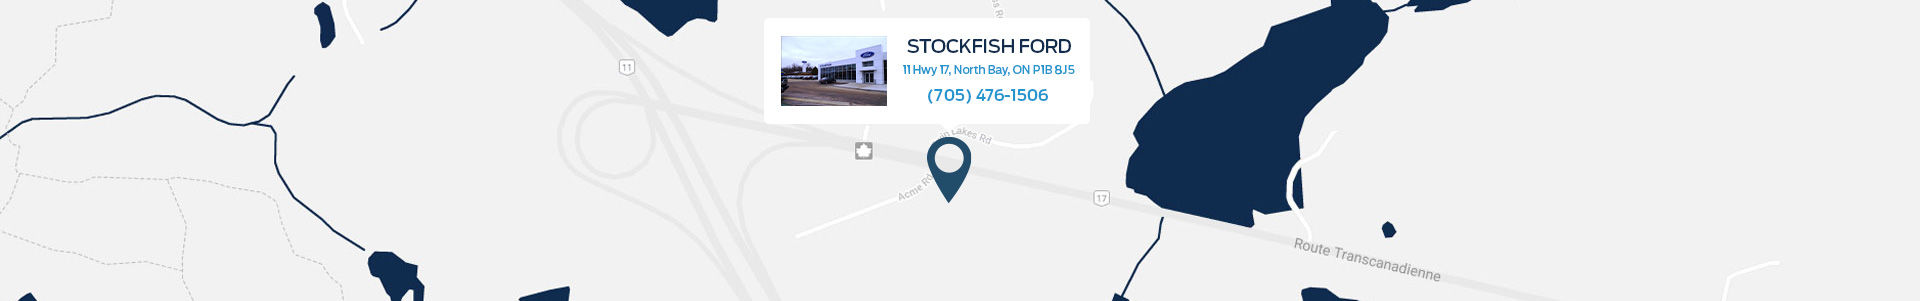 Stockfish Ford in North Bay | About Us